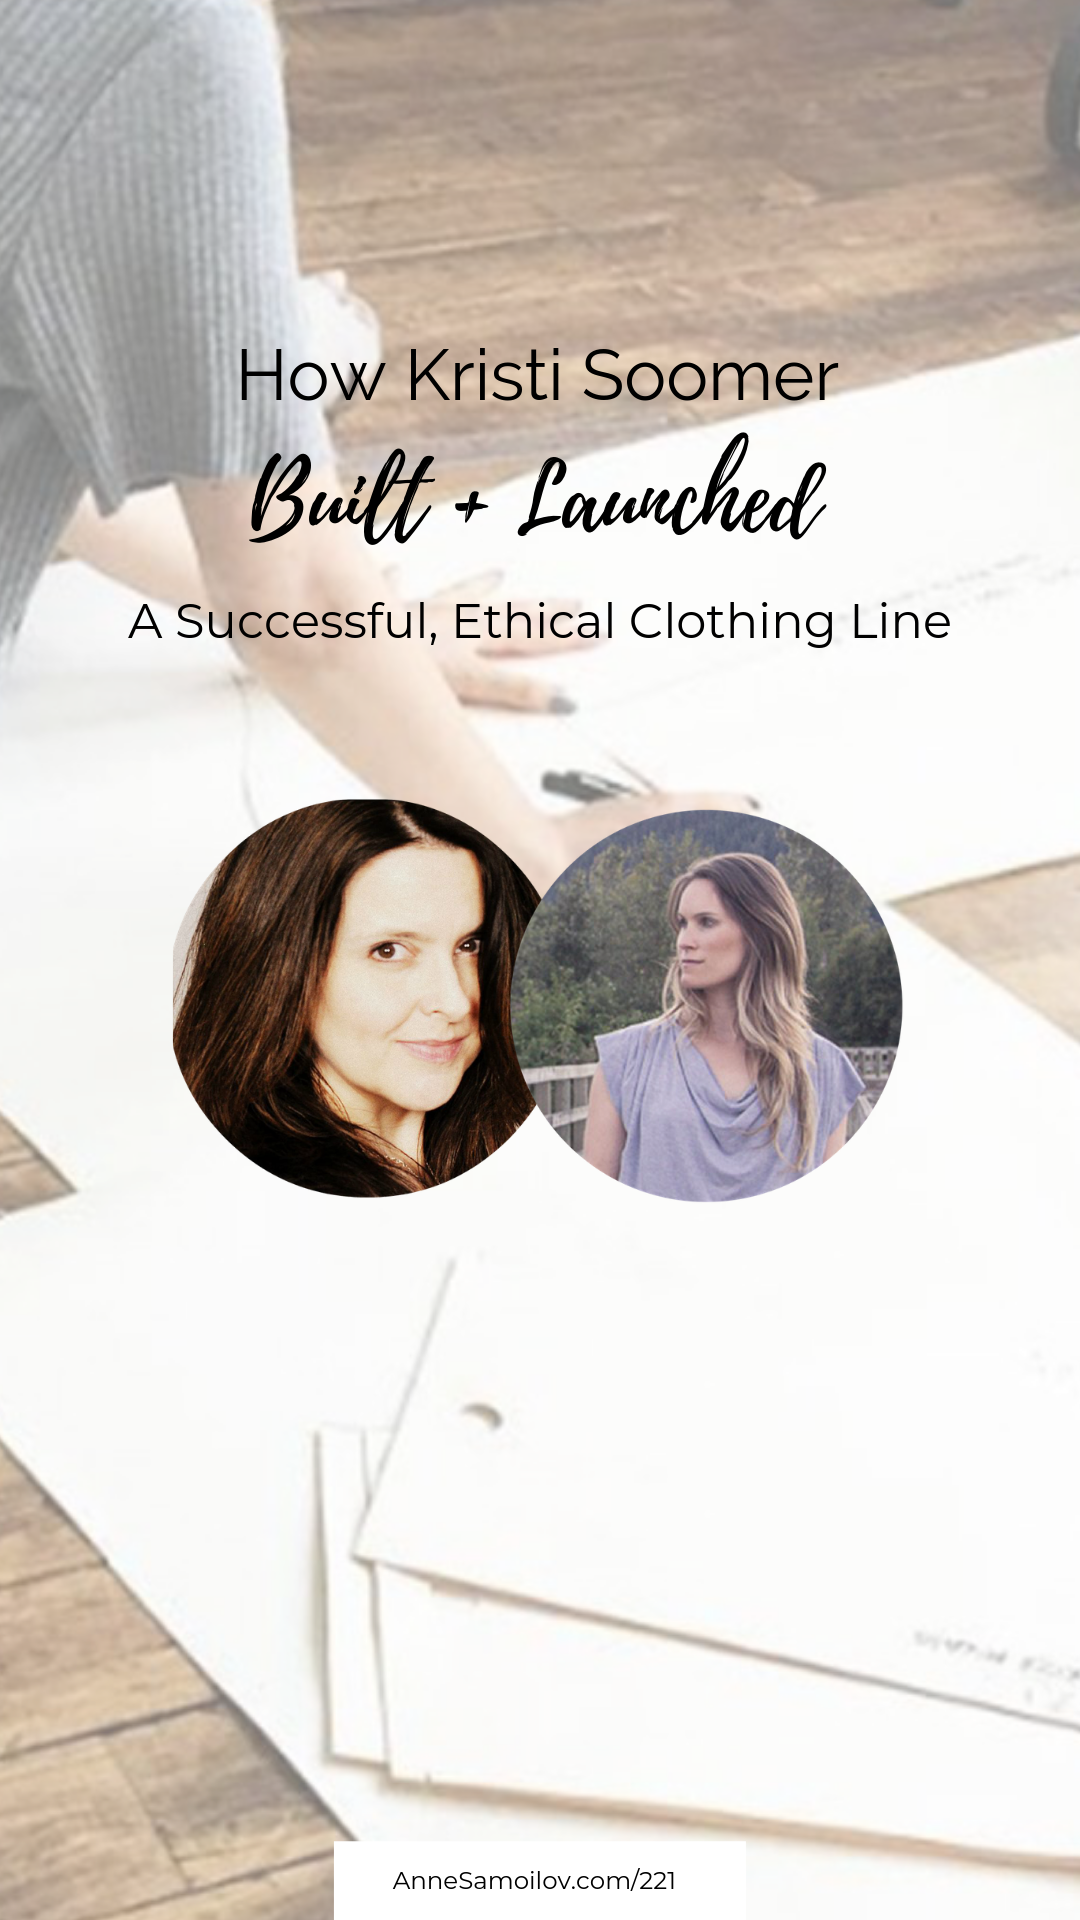 “how kristi soomer built and launched